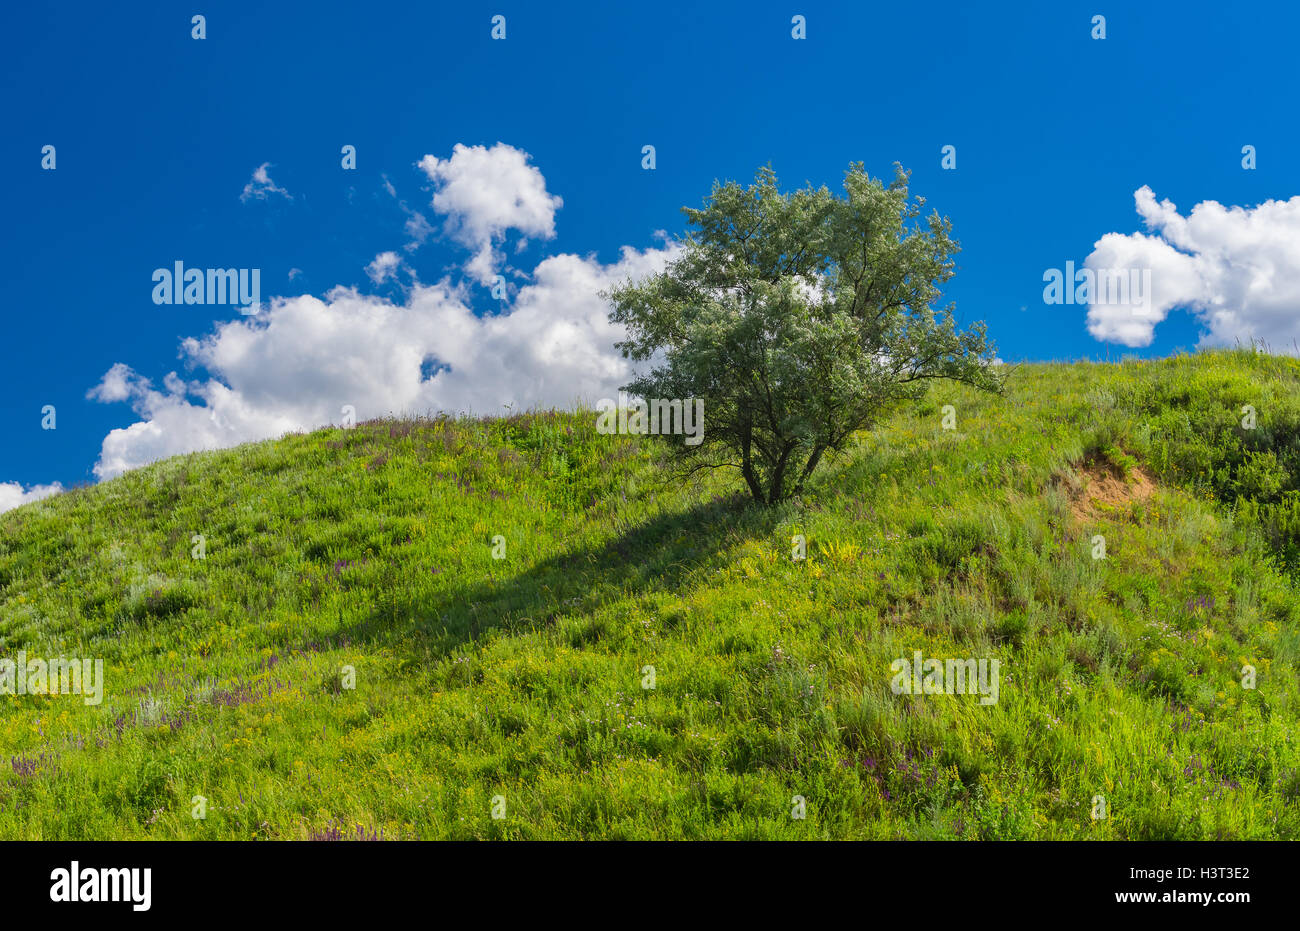 Summer landscape with lonely silver-berry tree on a hill in rural Ukrainian area Stock Photo